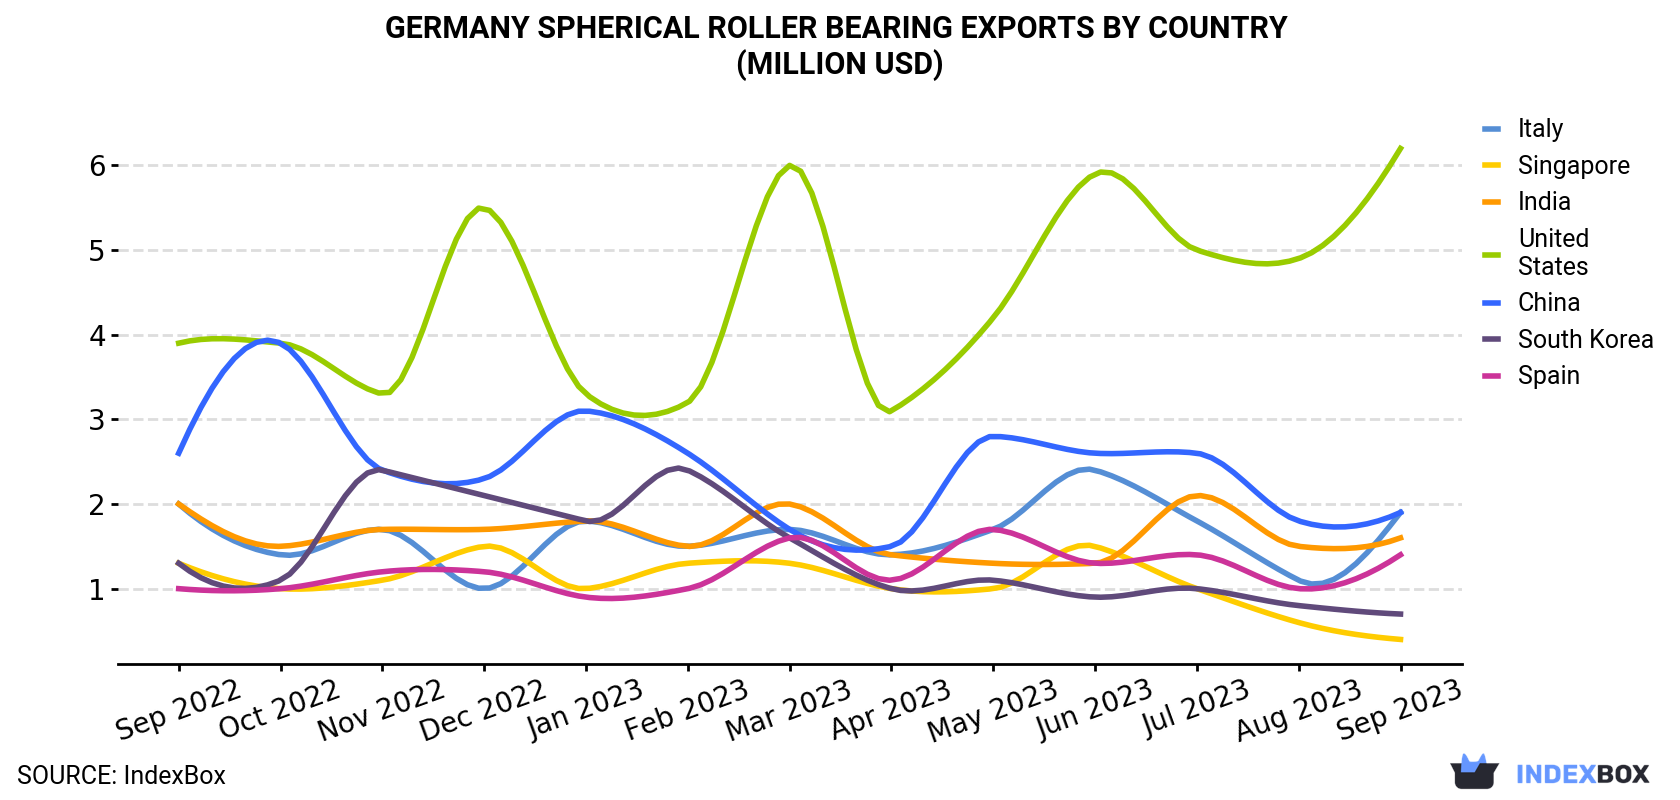 Germany Spherical Roller Bearing Exports By Country (Million USD)